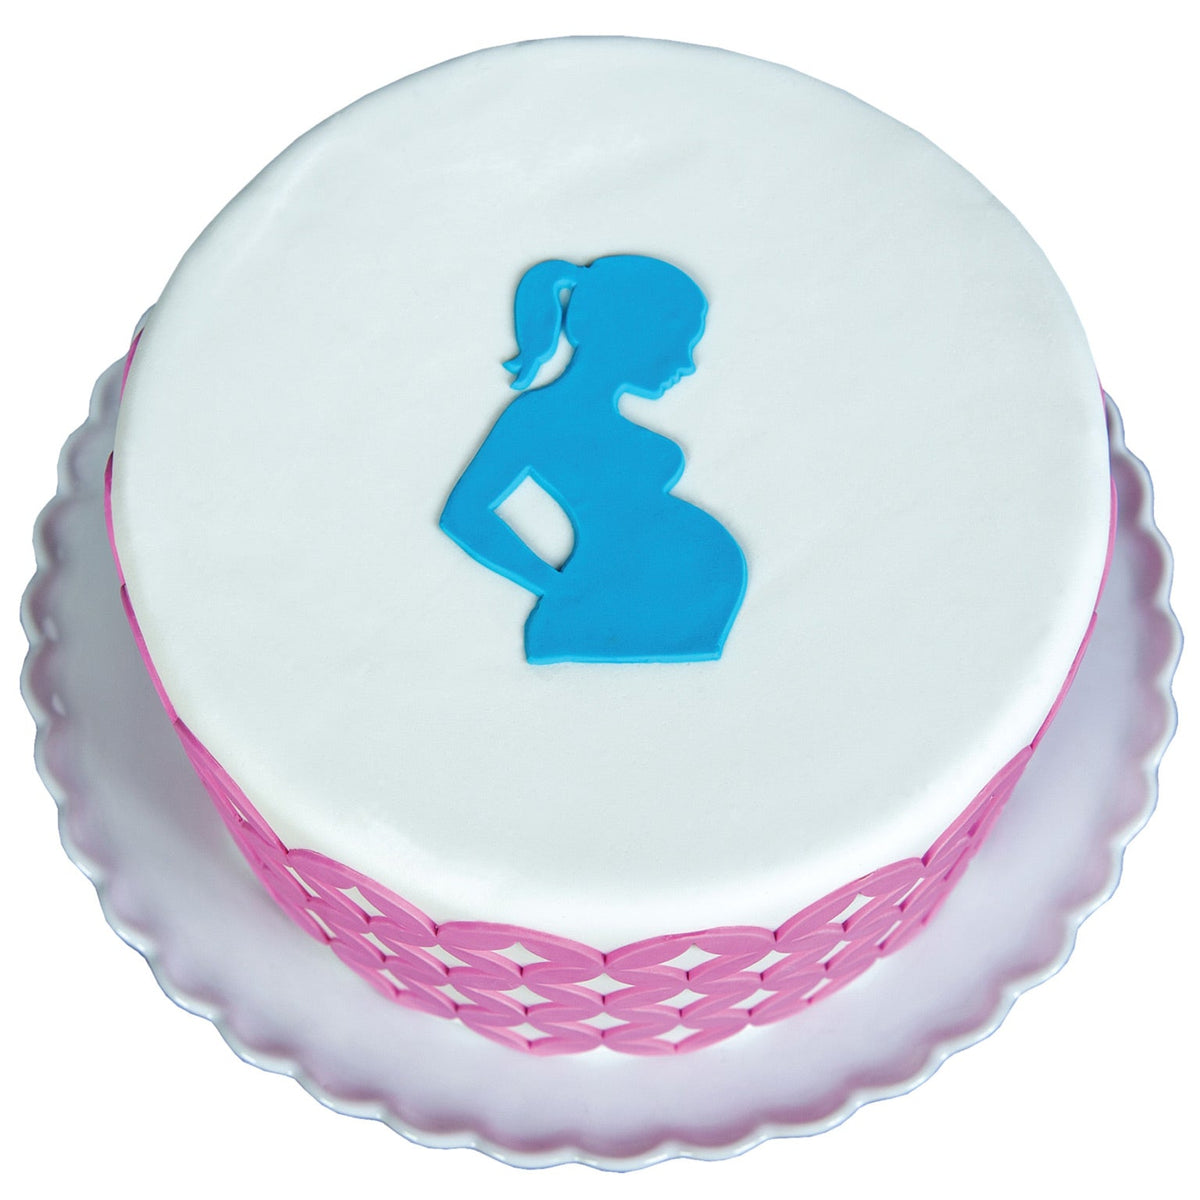 Decorated Cake Image showing the Baby Bump Food Safe Silicone Onlay for Fondant Cake Decorating